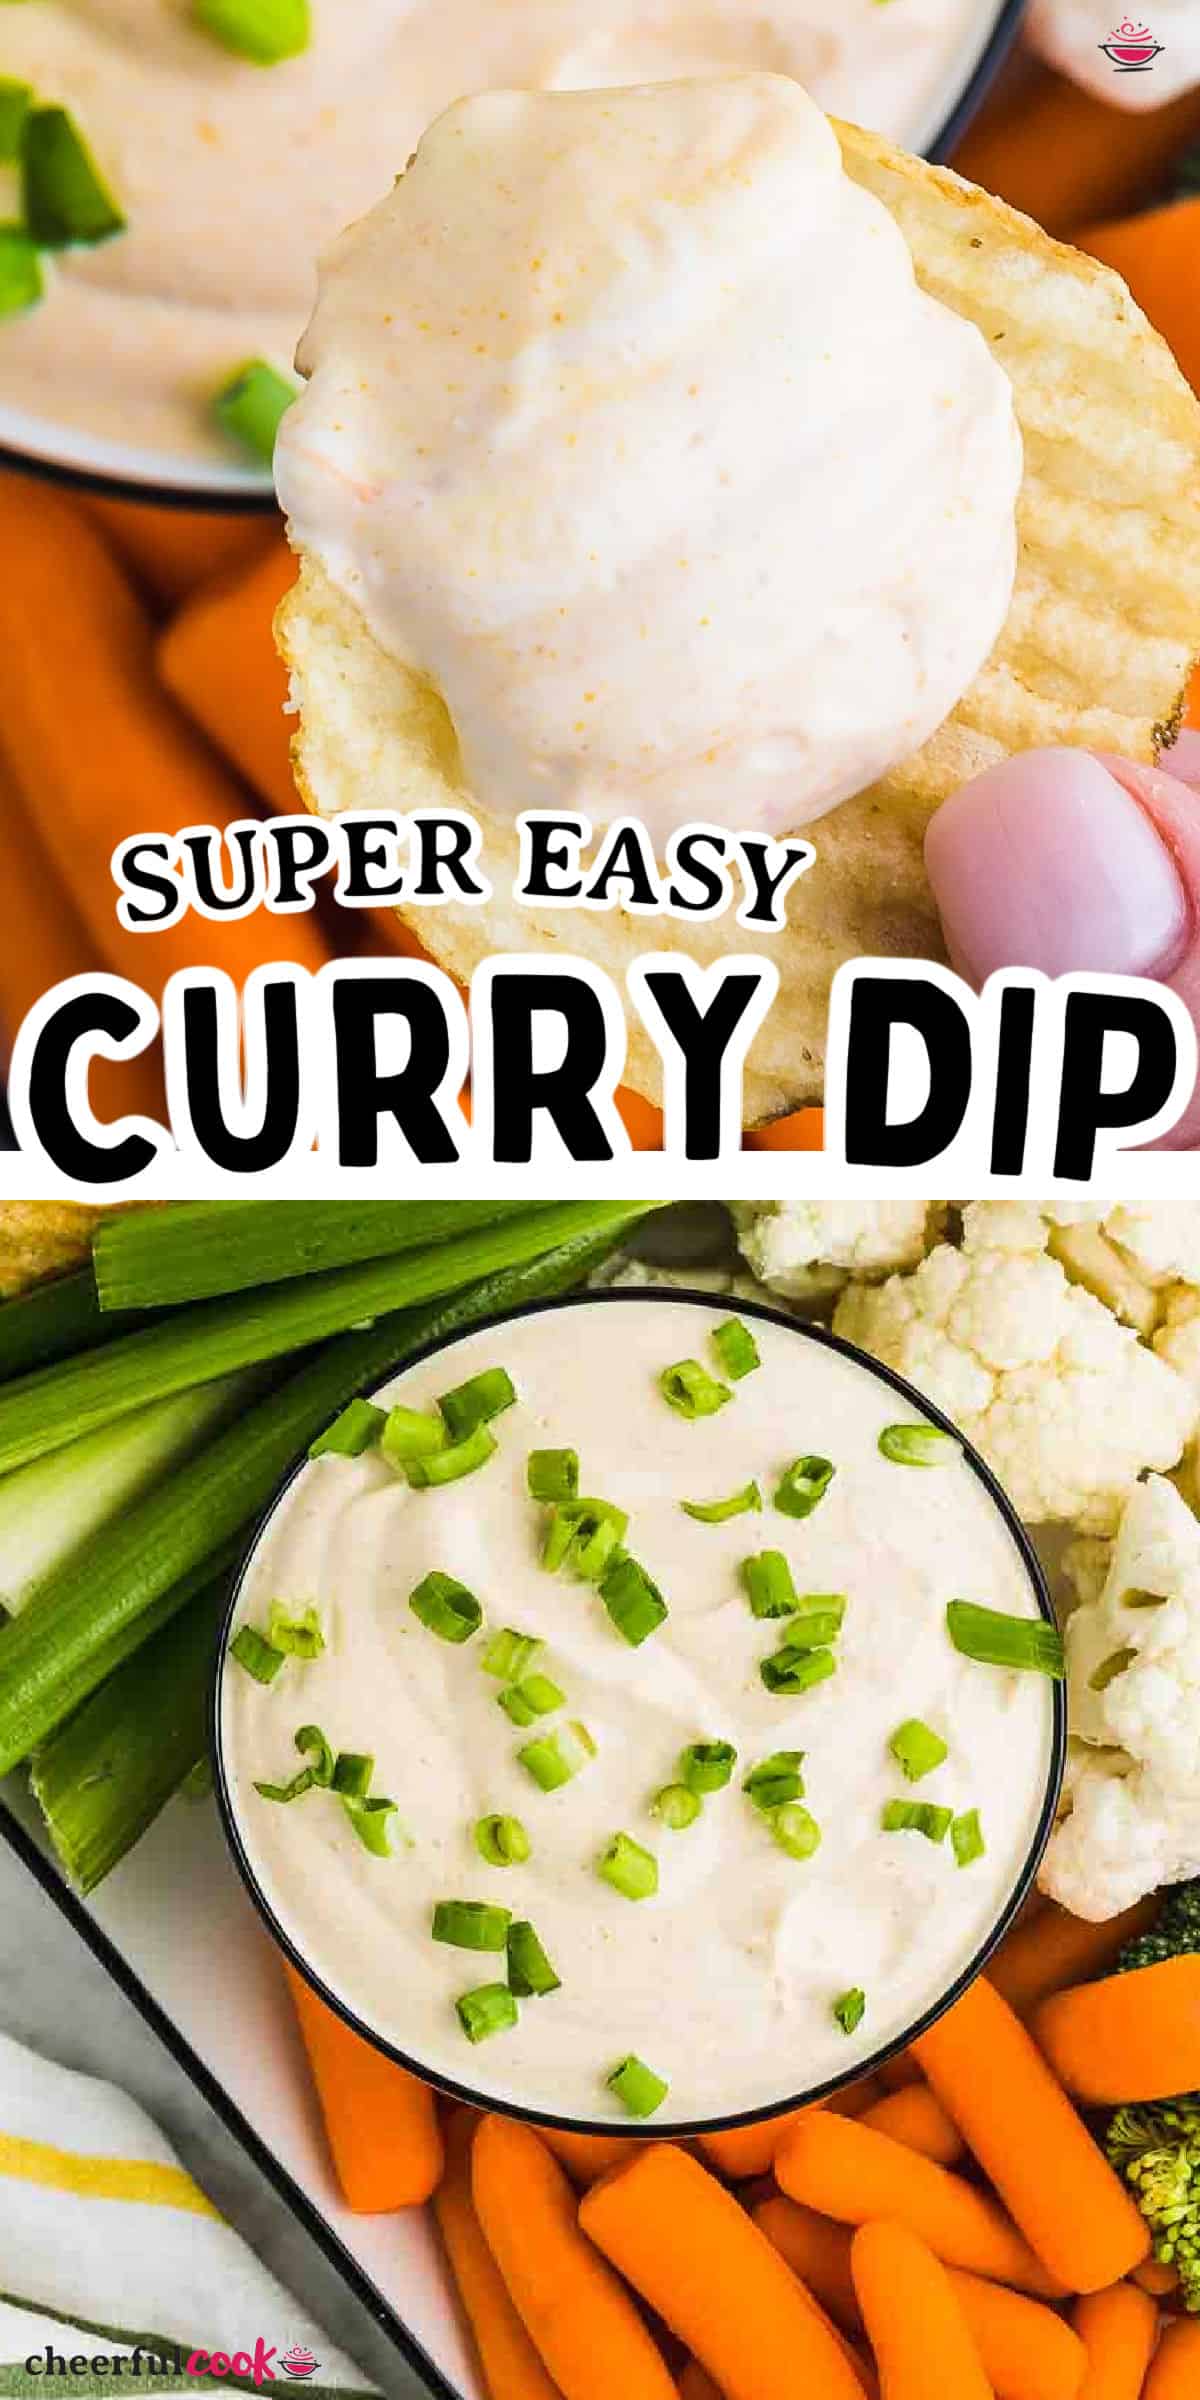 This delicious, easy 5-minute Curry Dip is perfect with veggies, crackers, and chips. Great for parties, game days, or potlucks. #cheerfulcook #currydip #recipe #veggiedip #creamydip #sourcreamdip via @cheerfulcook